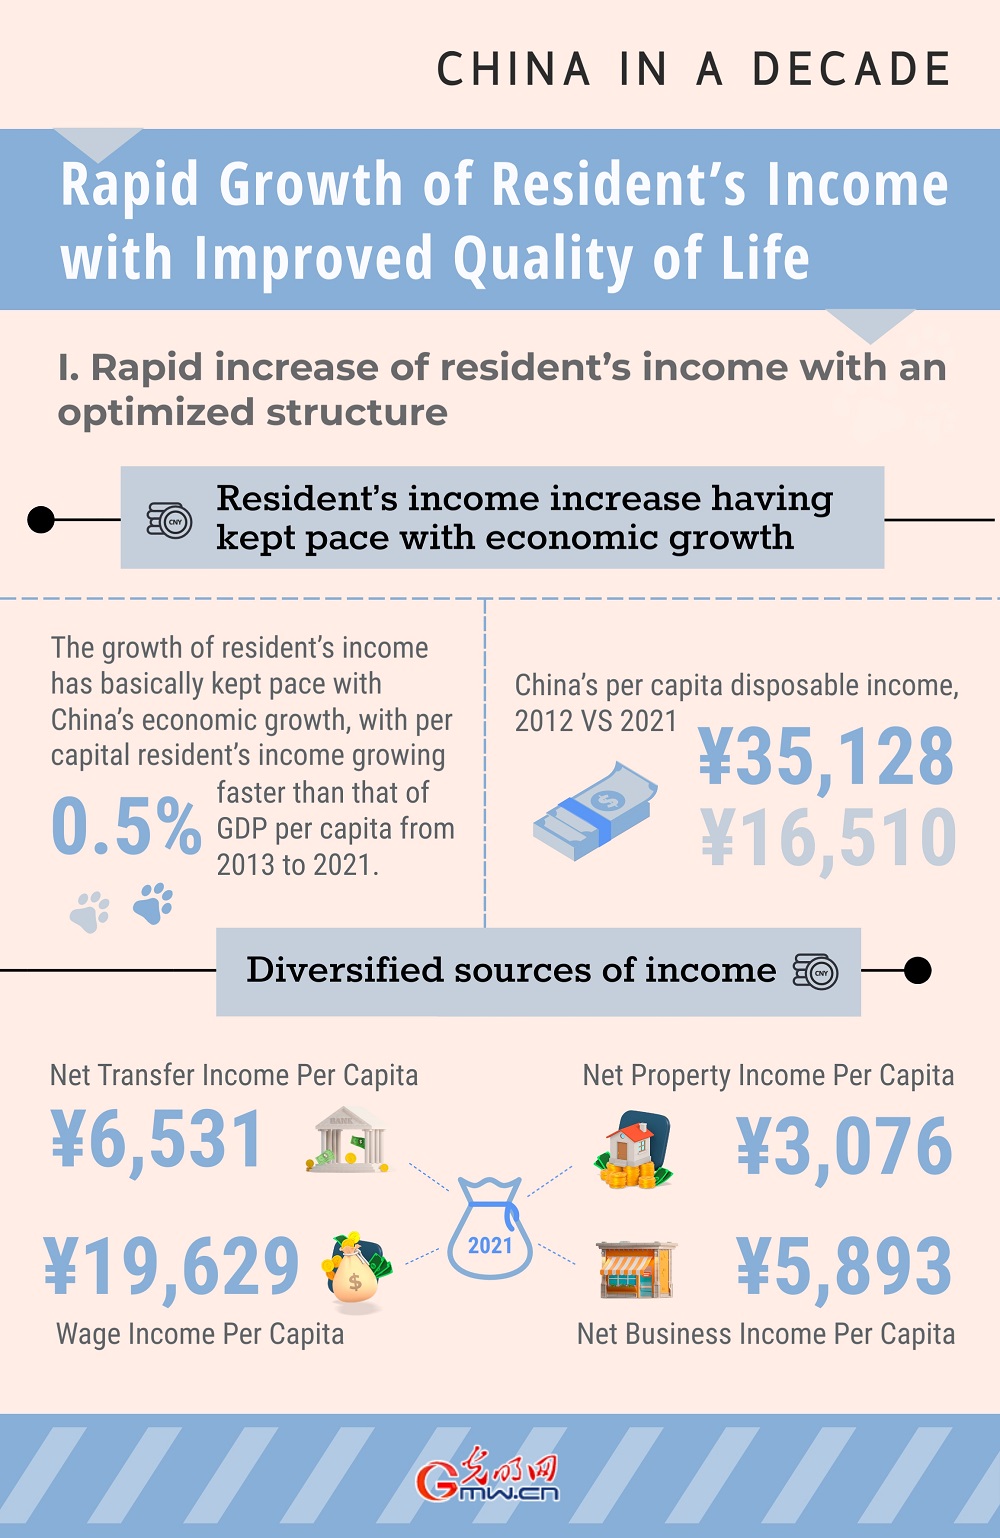 China in a Decade: Rapid Growth of Resident's Income with Improved Quality of Life